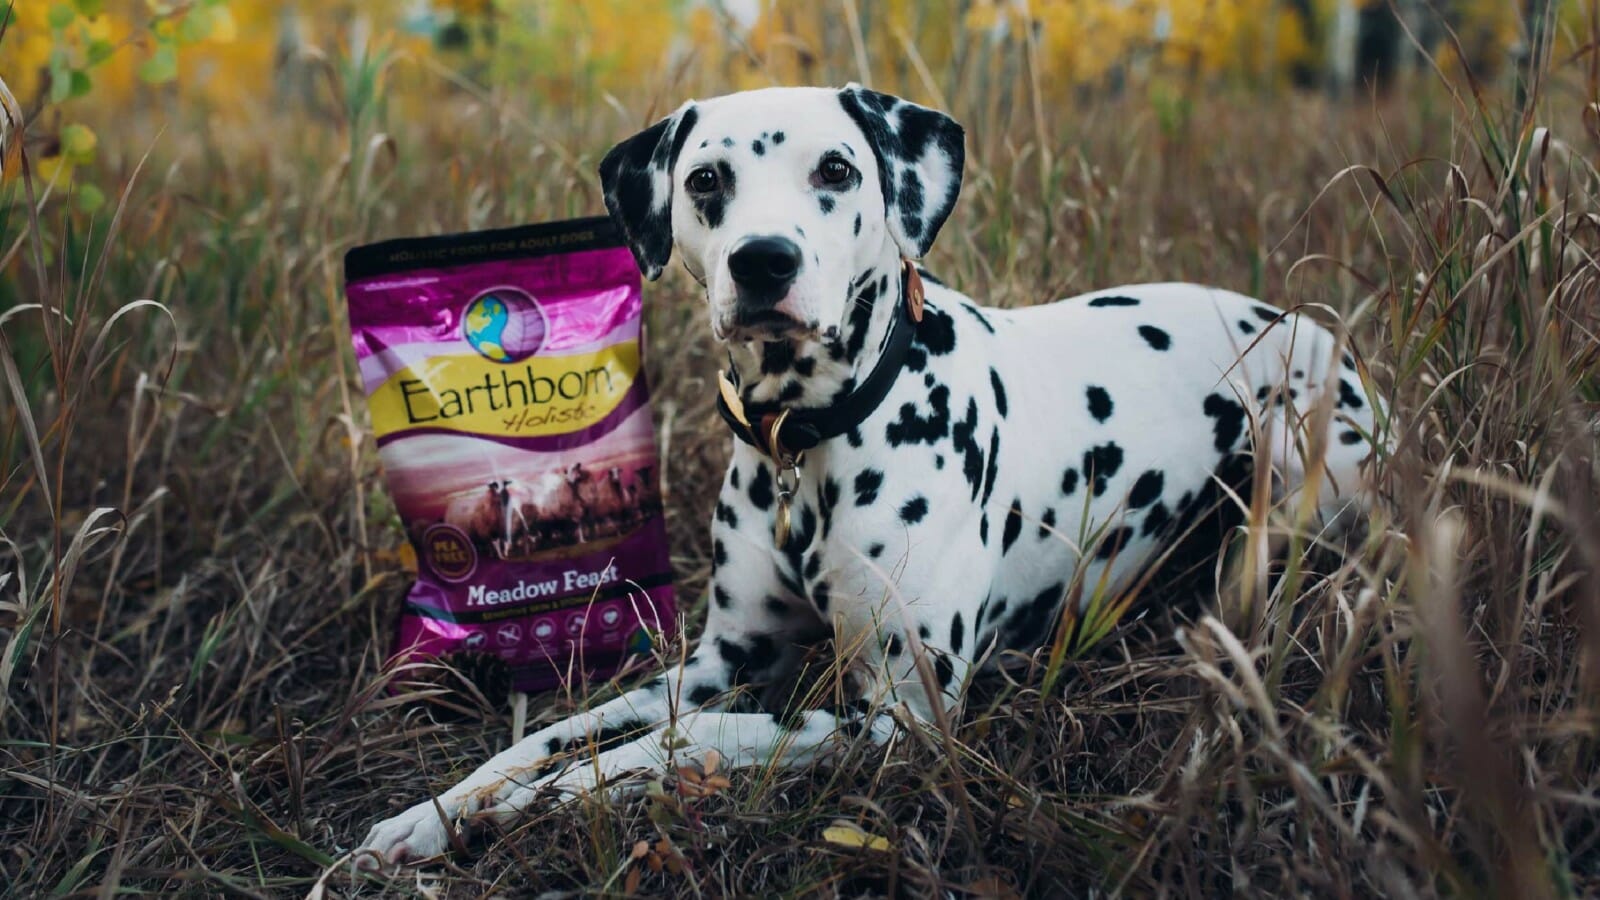 A dog lays next to a bag of Earthborn Holistic Meadow Feast